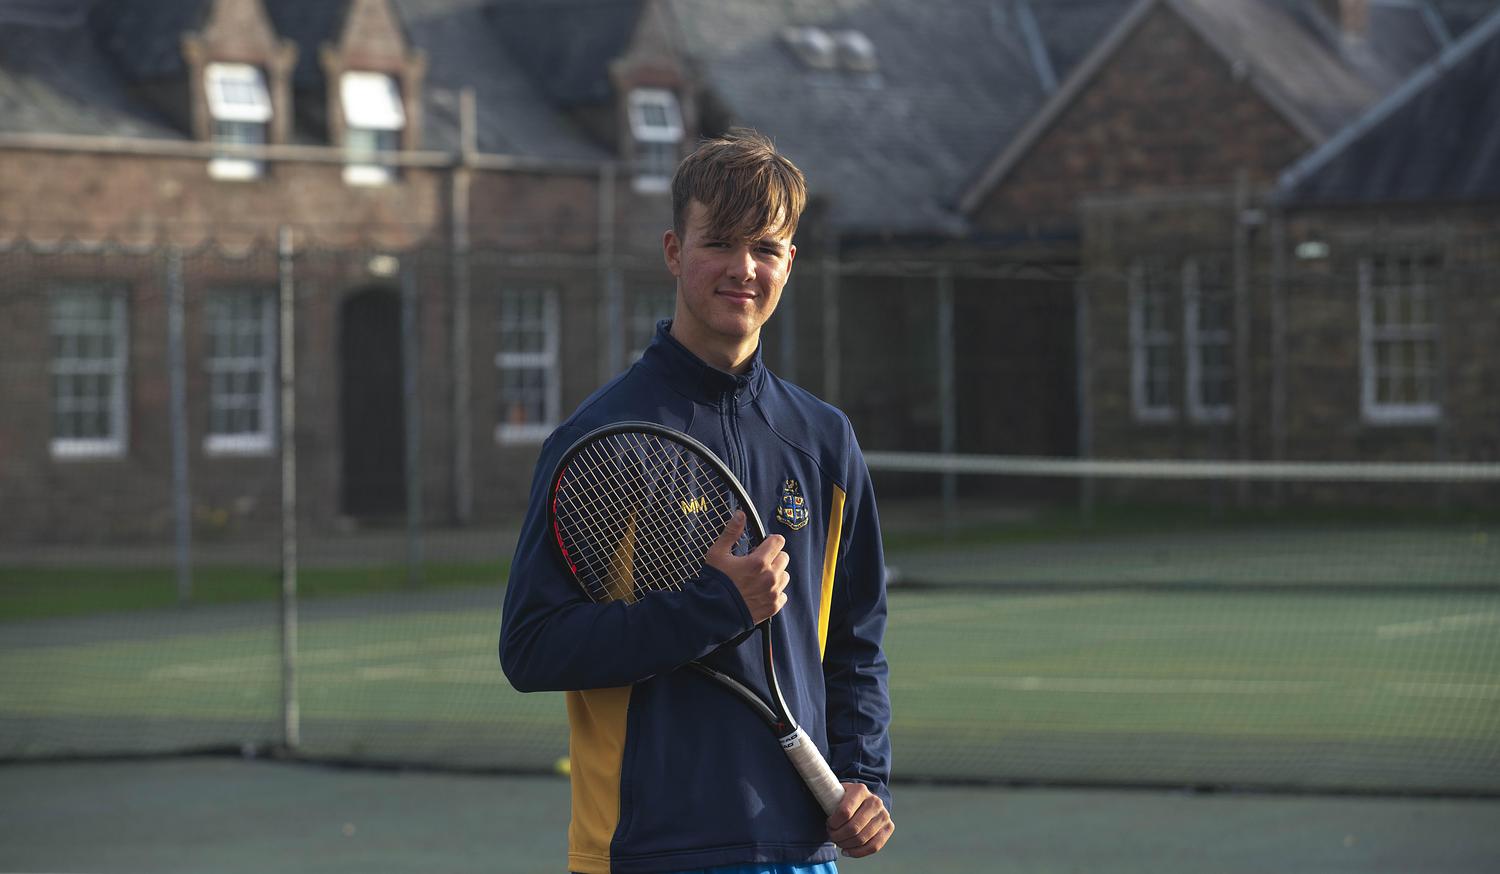 Marcus set to serve at the University of Stirling